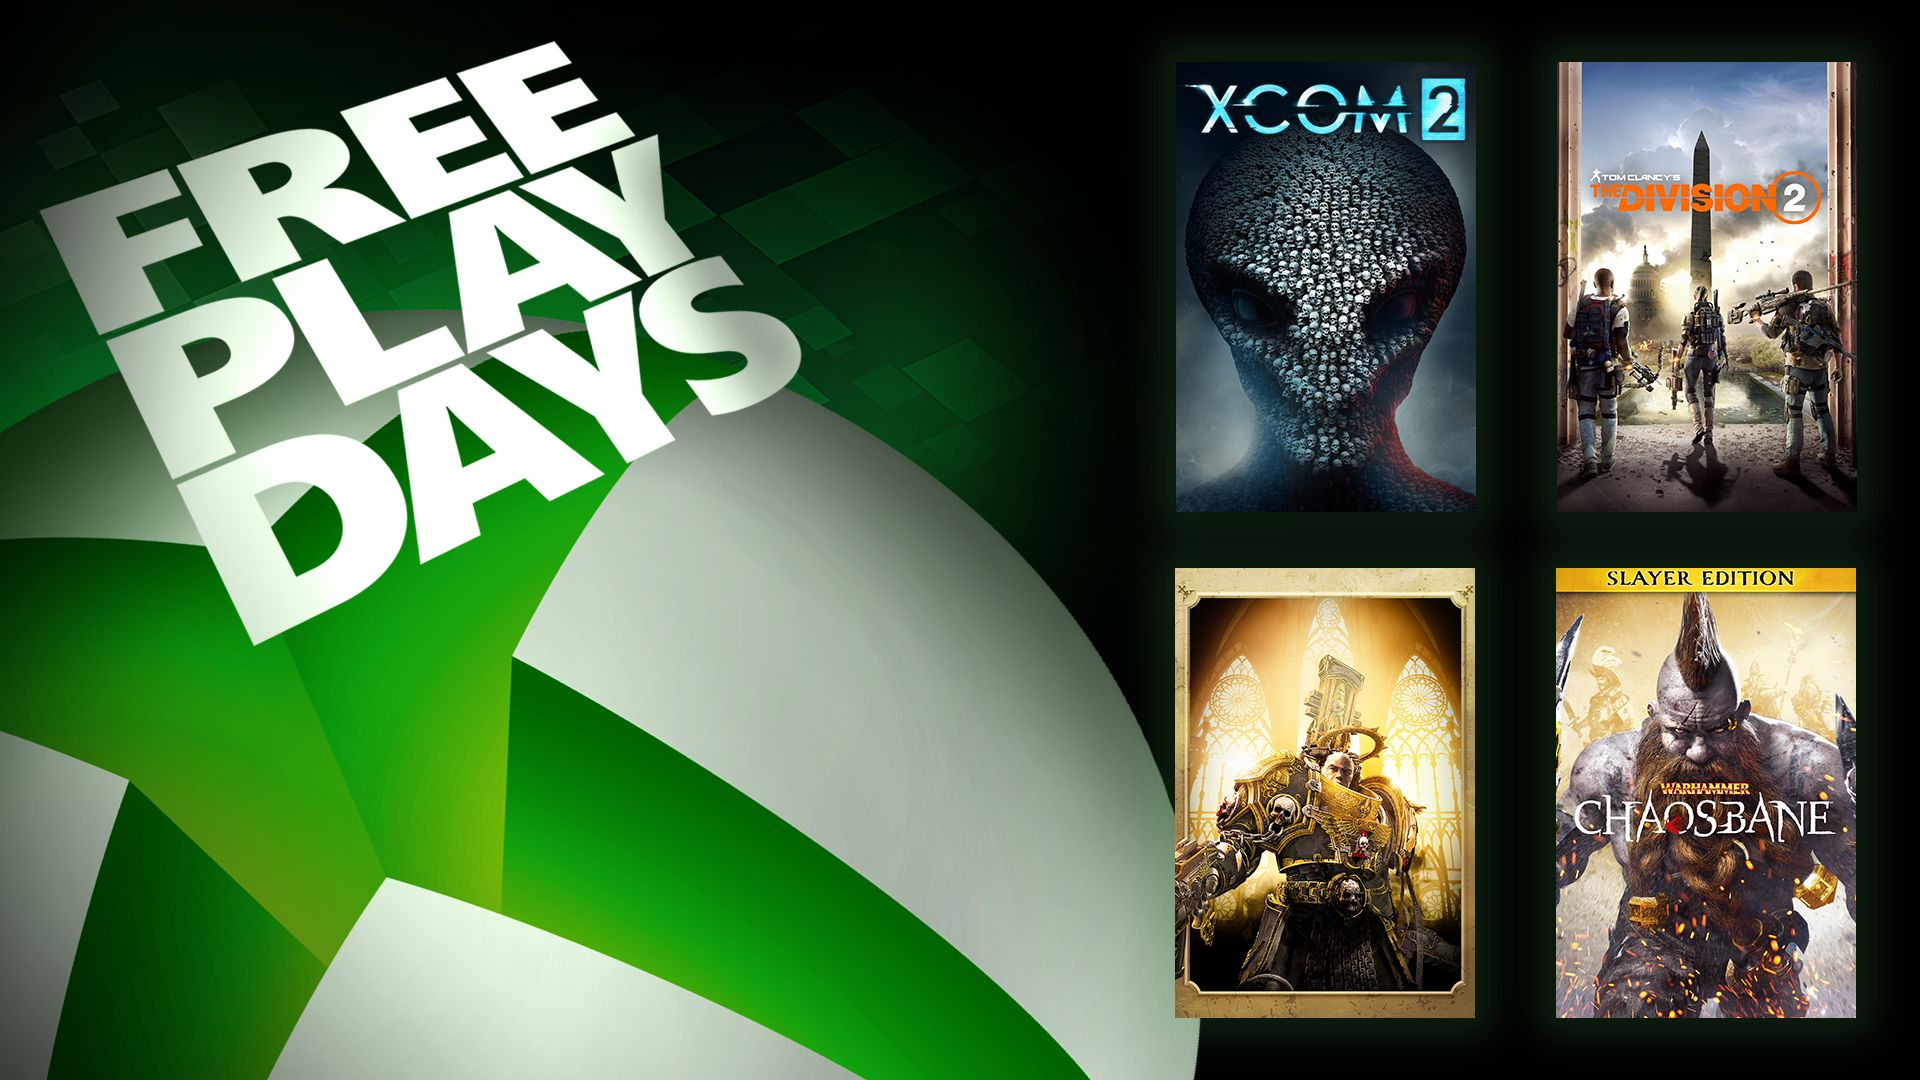 Días de juego gratis: XCOM 2, Tom Clancy's The Division 2, Warhammer 40,000: Inquisitor - Martyr Ultimate Edition y Warhammer: Chaosbane Slayer Edition Xbox Series X|S